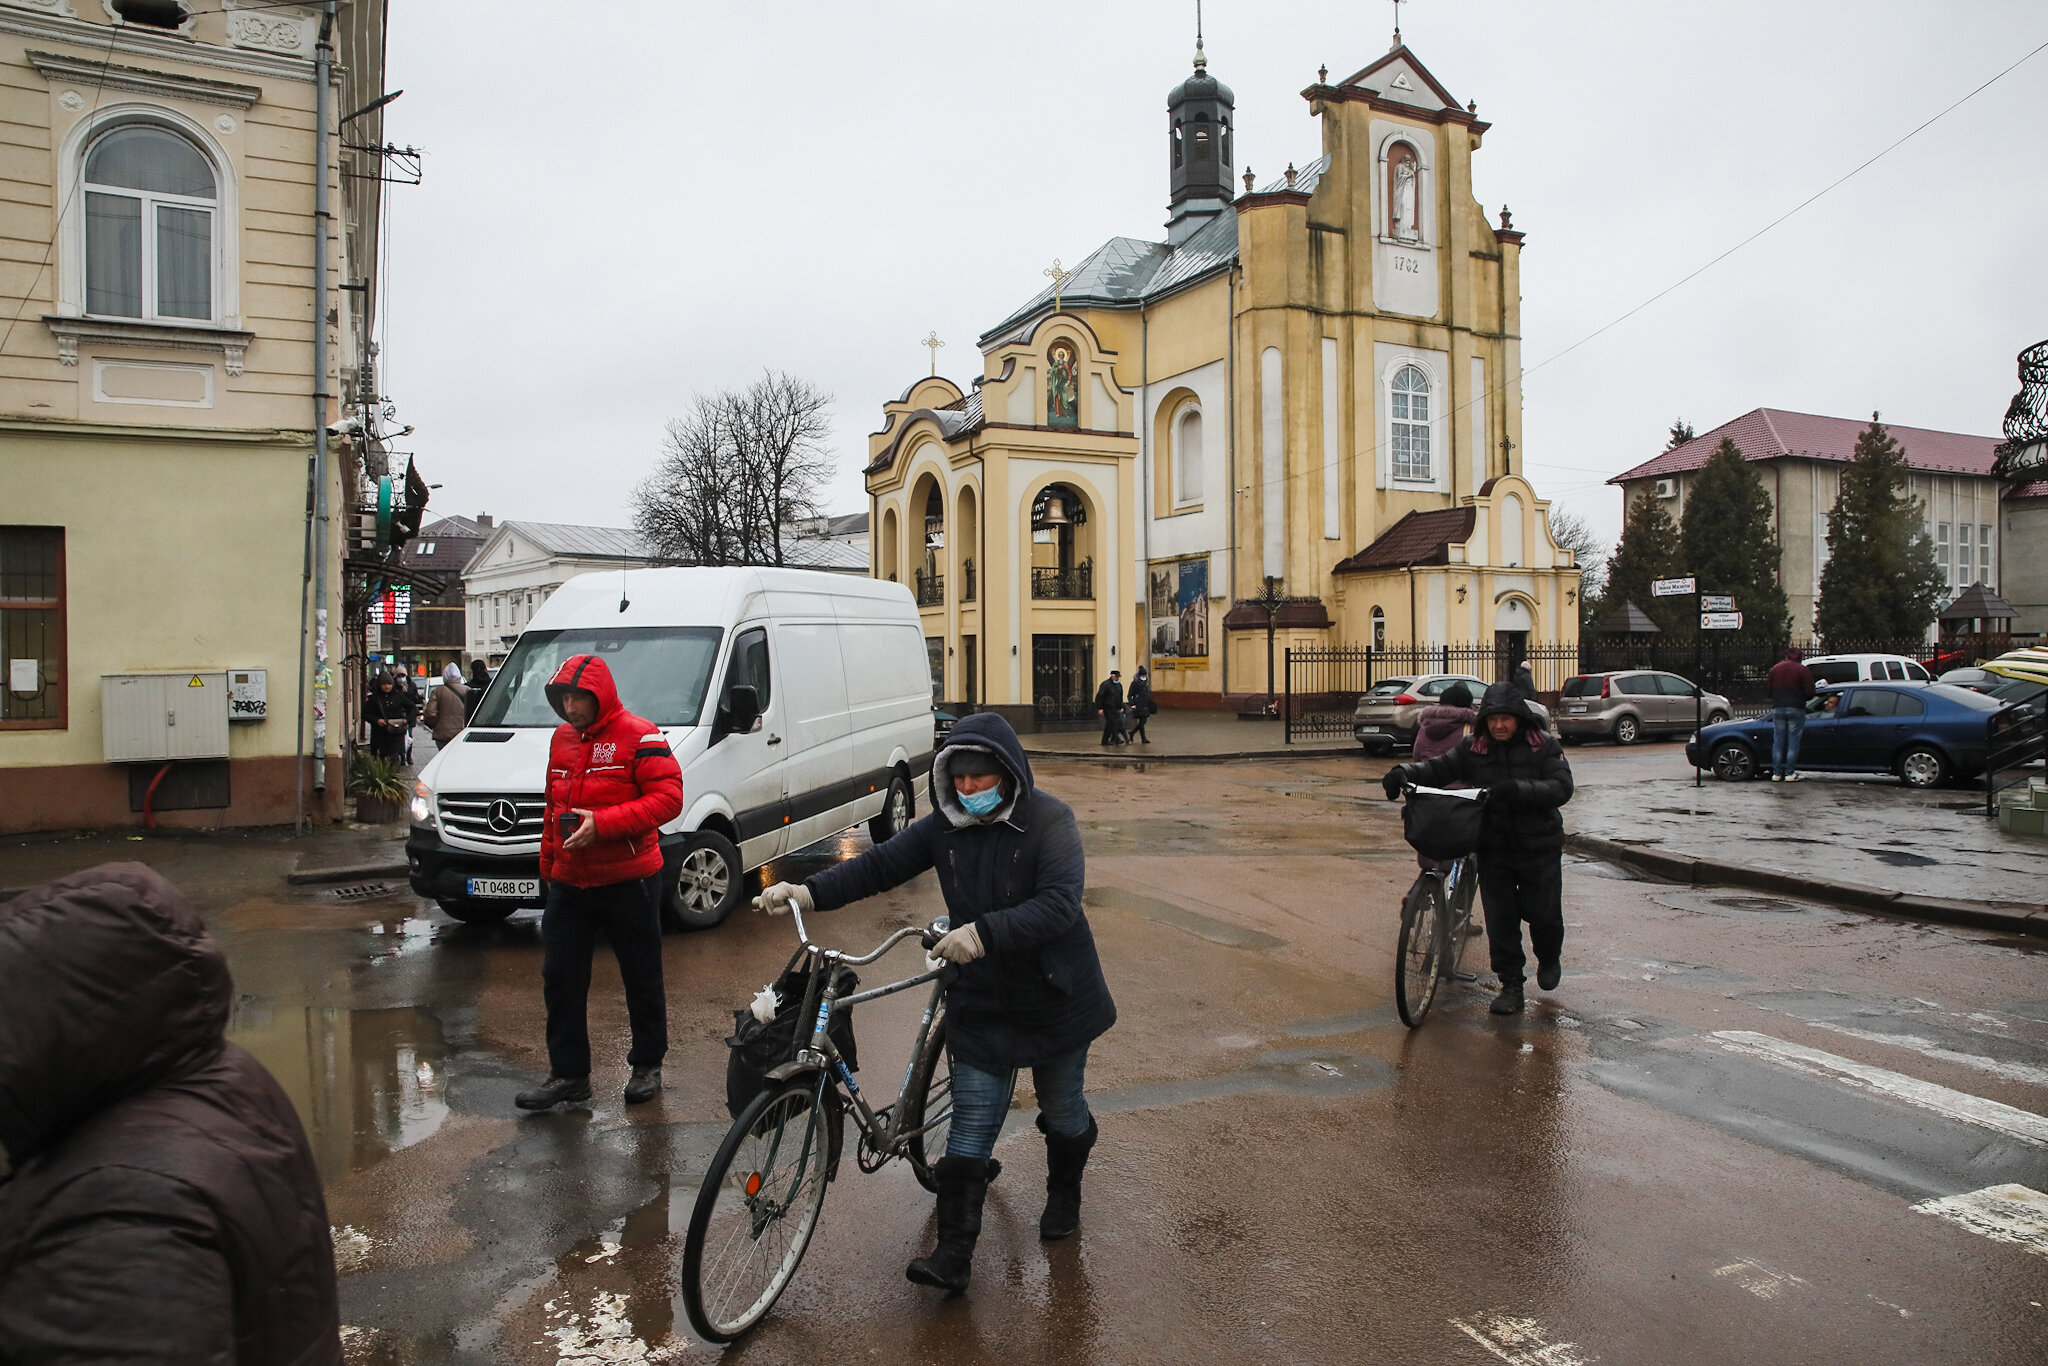 People walk along the streets of Kolomyia, a city in Ivano-Frankivsk Oblast, on March 16, 2021. The area is hit hard by coronavirus. 